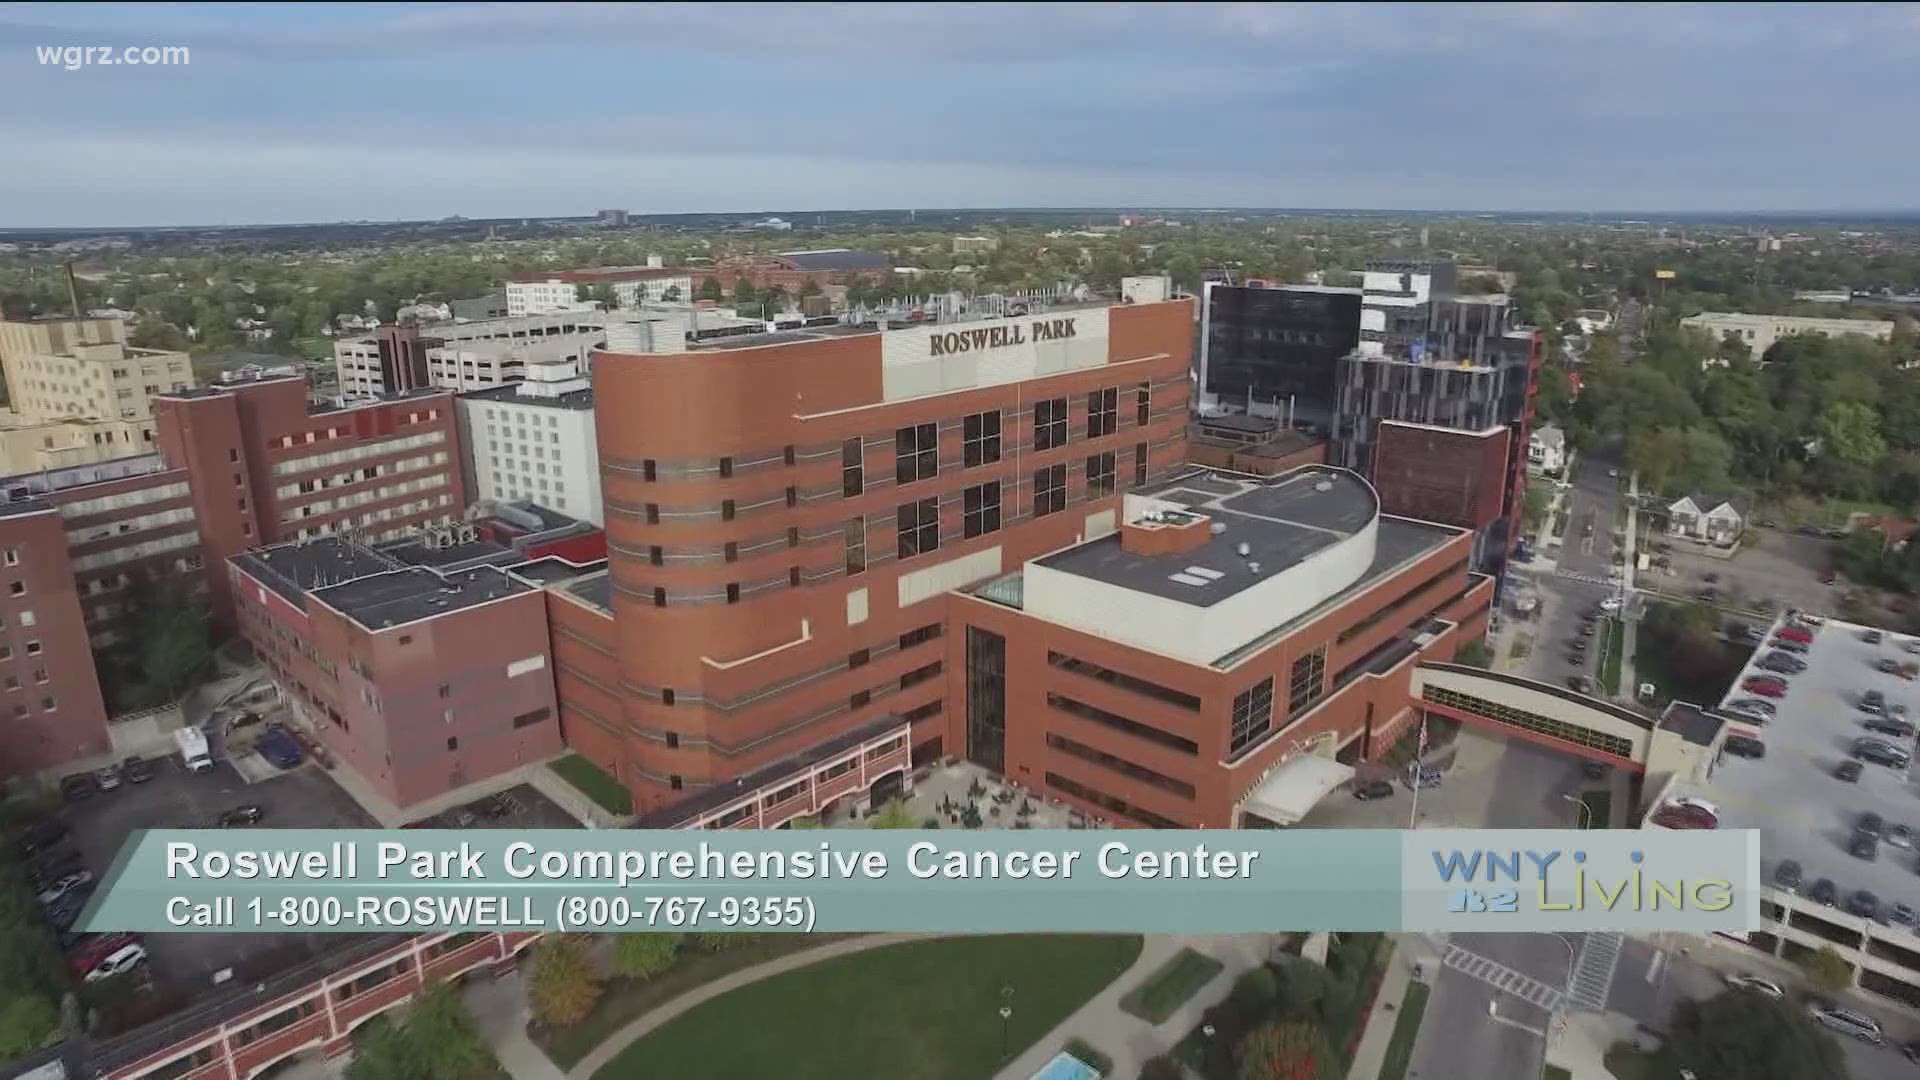 WNY Living - November 7 - Roswell Park Comprehensive Cancer Center (THIS VIDEO IS SPONSORED BY ROSWELL PARK COMPREHENSIVE CANCER CENTER)